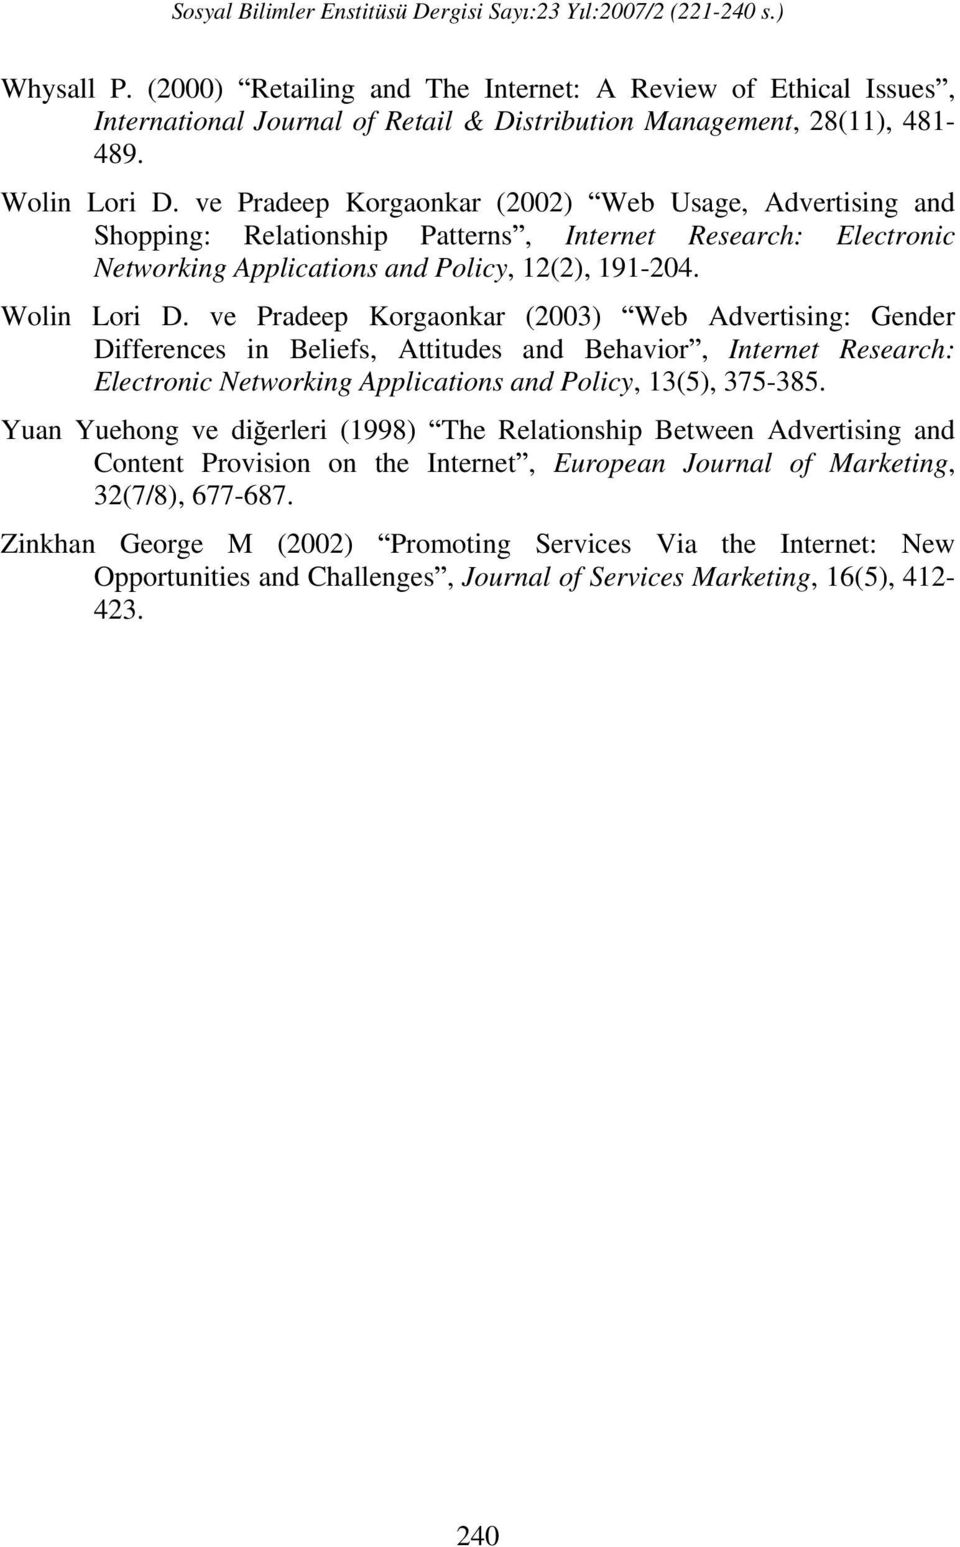 ve Pradeep Korgaonkar (2003) Web Advertising: Gender Differences in Beliefs, Attitudes and Behavior, Internet Research: Electronic Networking Applications and Policy, 13(5), 375-385.